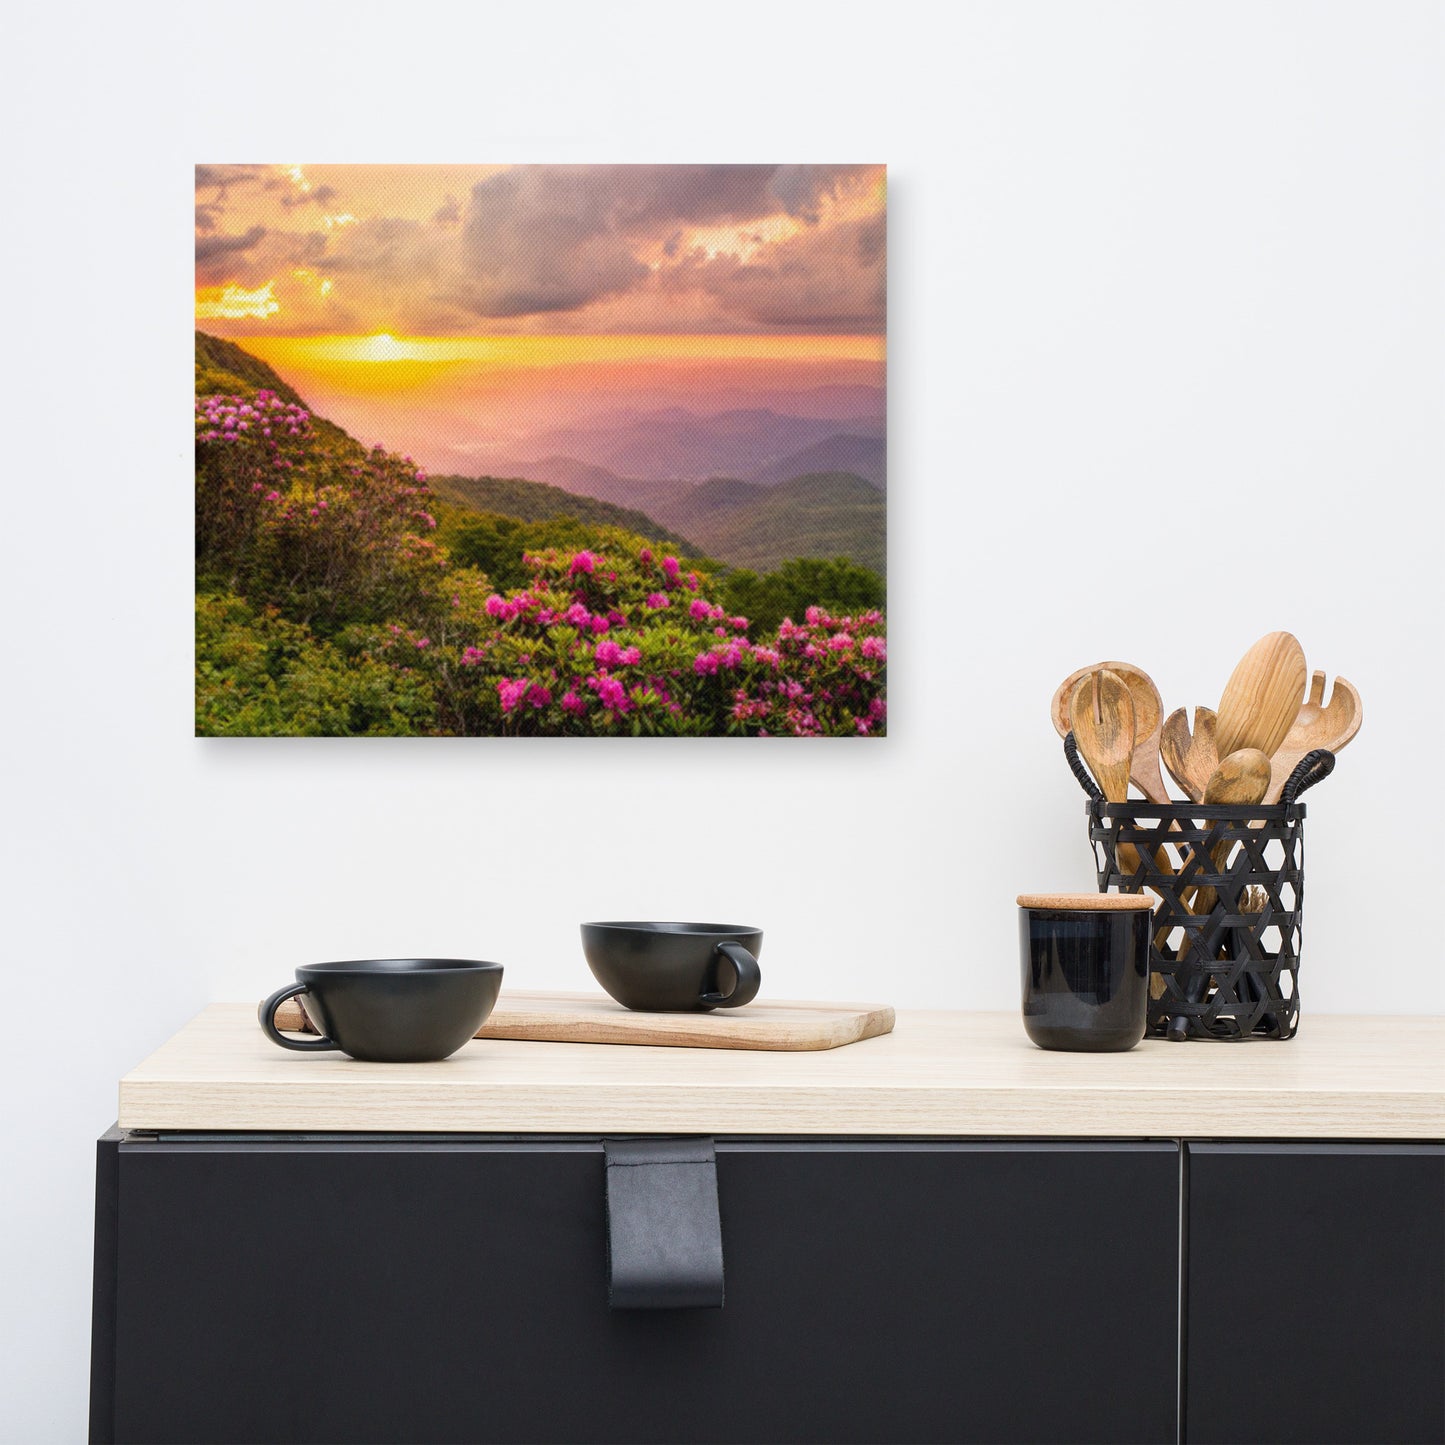 Master Bedroom Wall Art Above Bed: Close of the Day - Appalachian Mountains Sunset - Floral / Botanical / Rustic Landscape Photograph Asheville North Carolina Blue Ridge Parkway